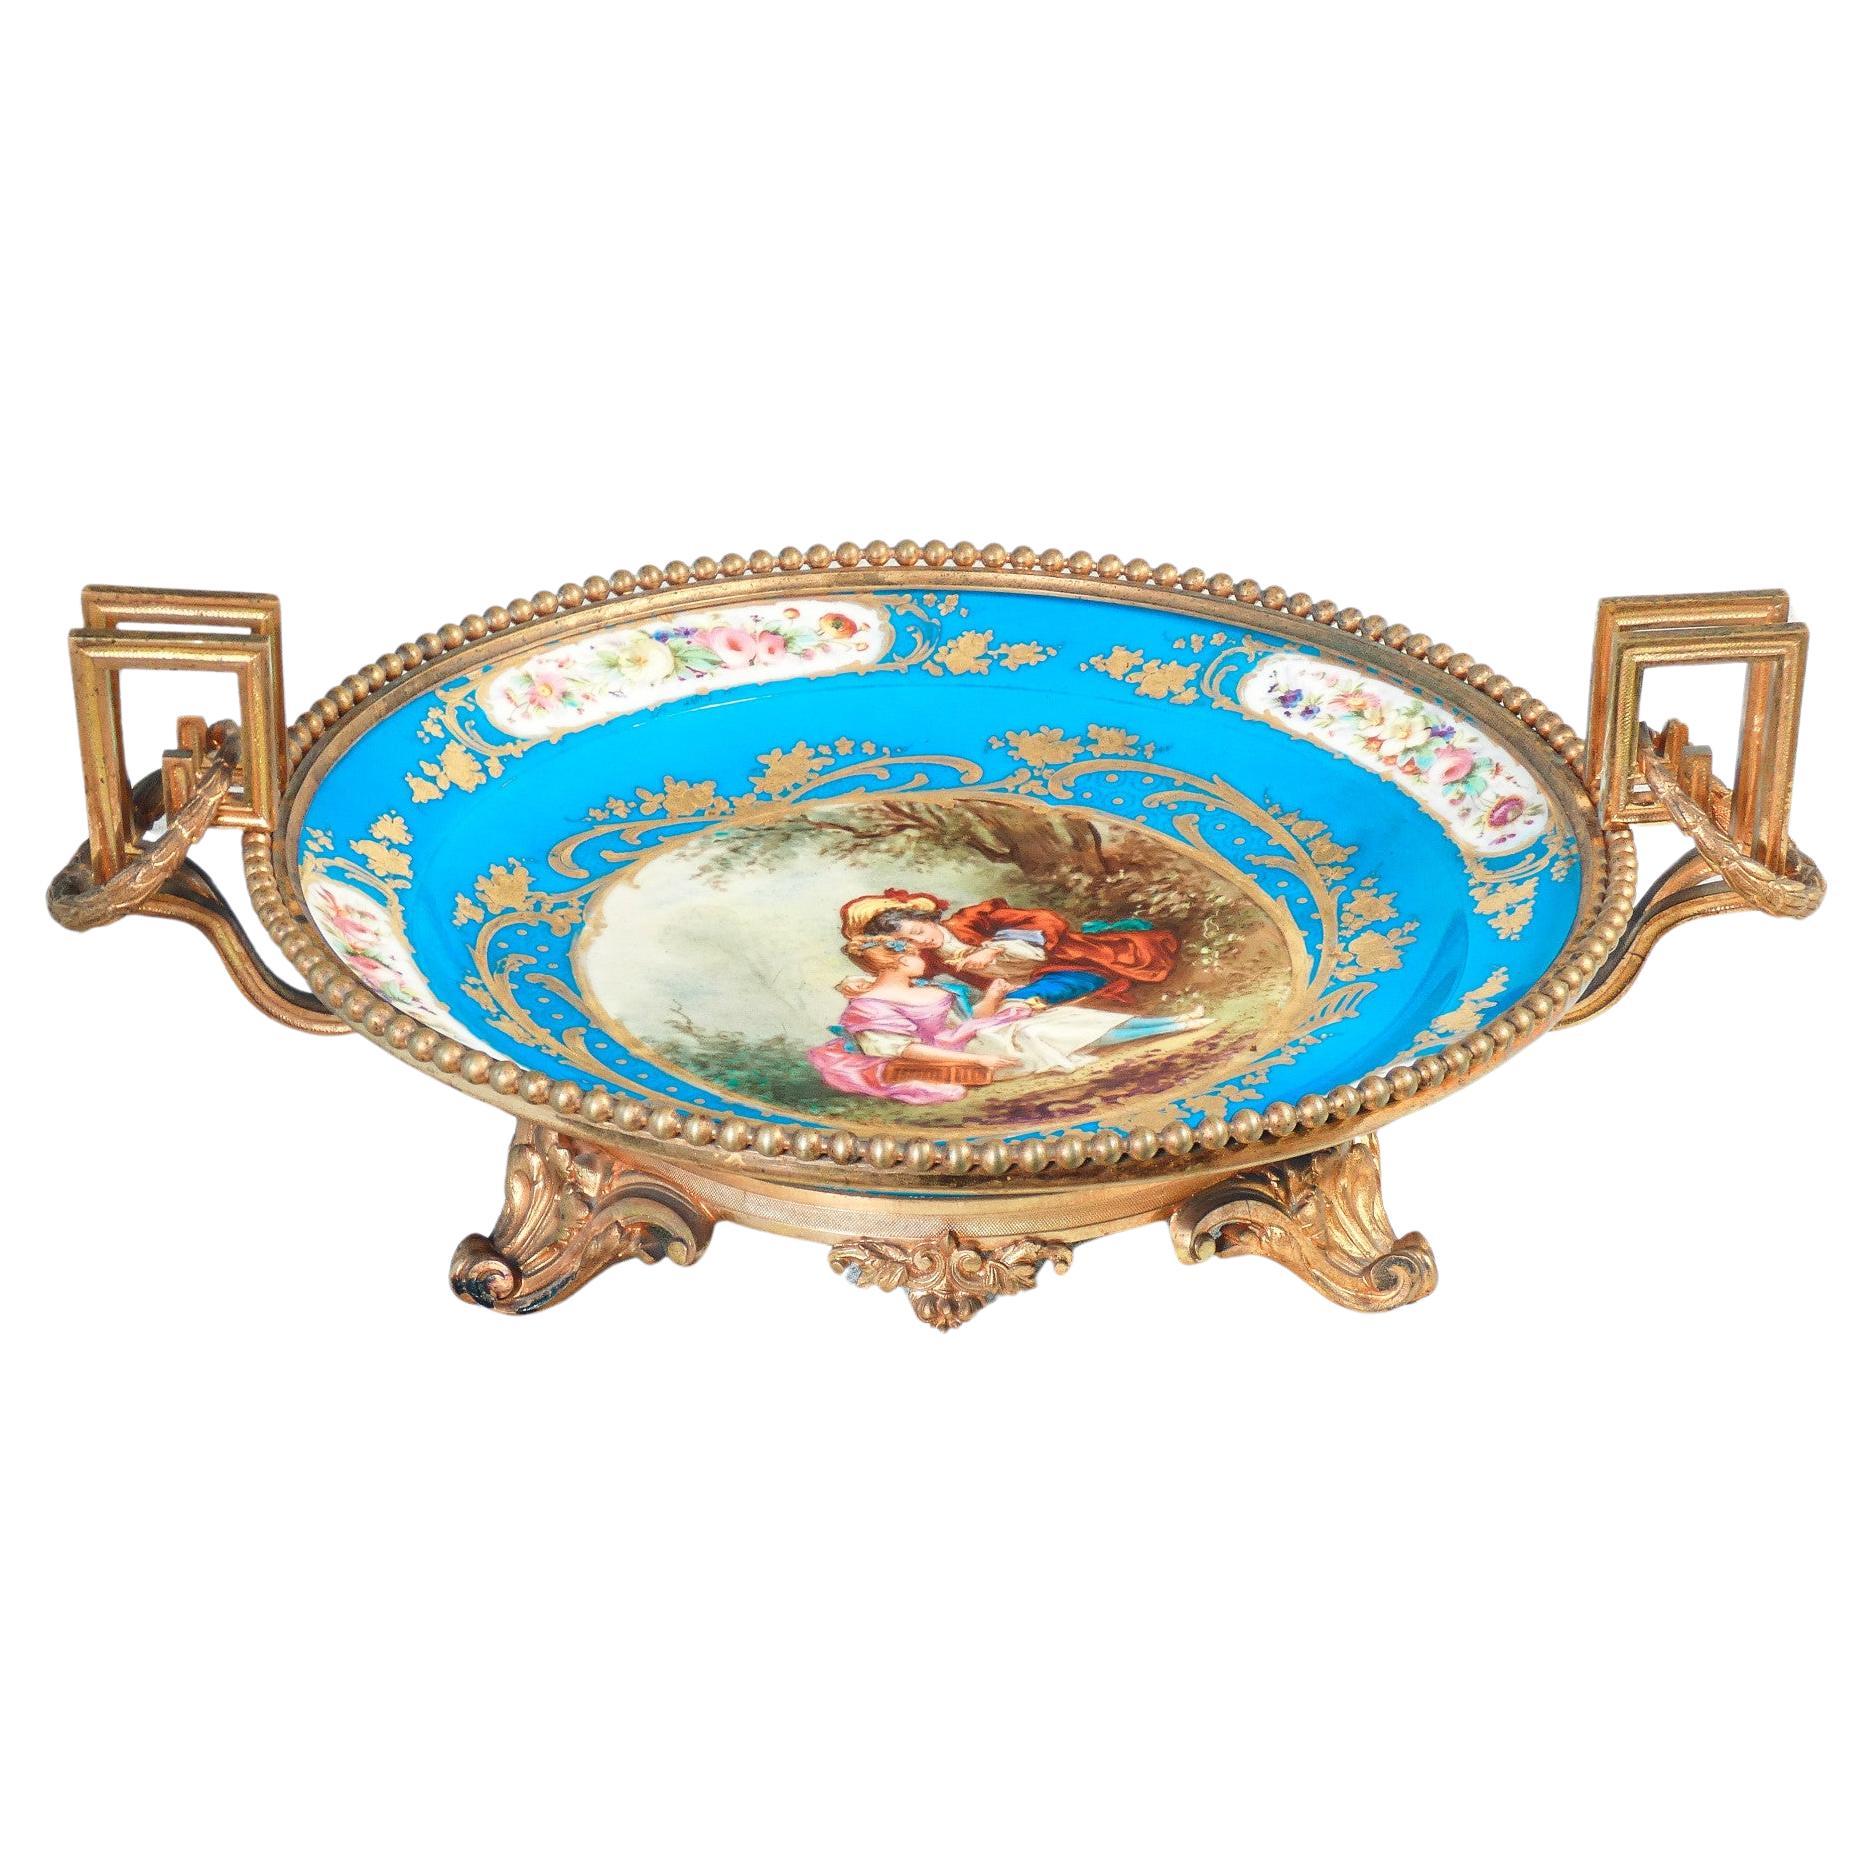 Hand-painted French porcelain riser with gallant scene. Early twentieth century